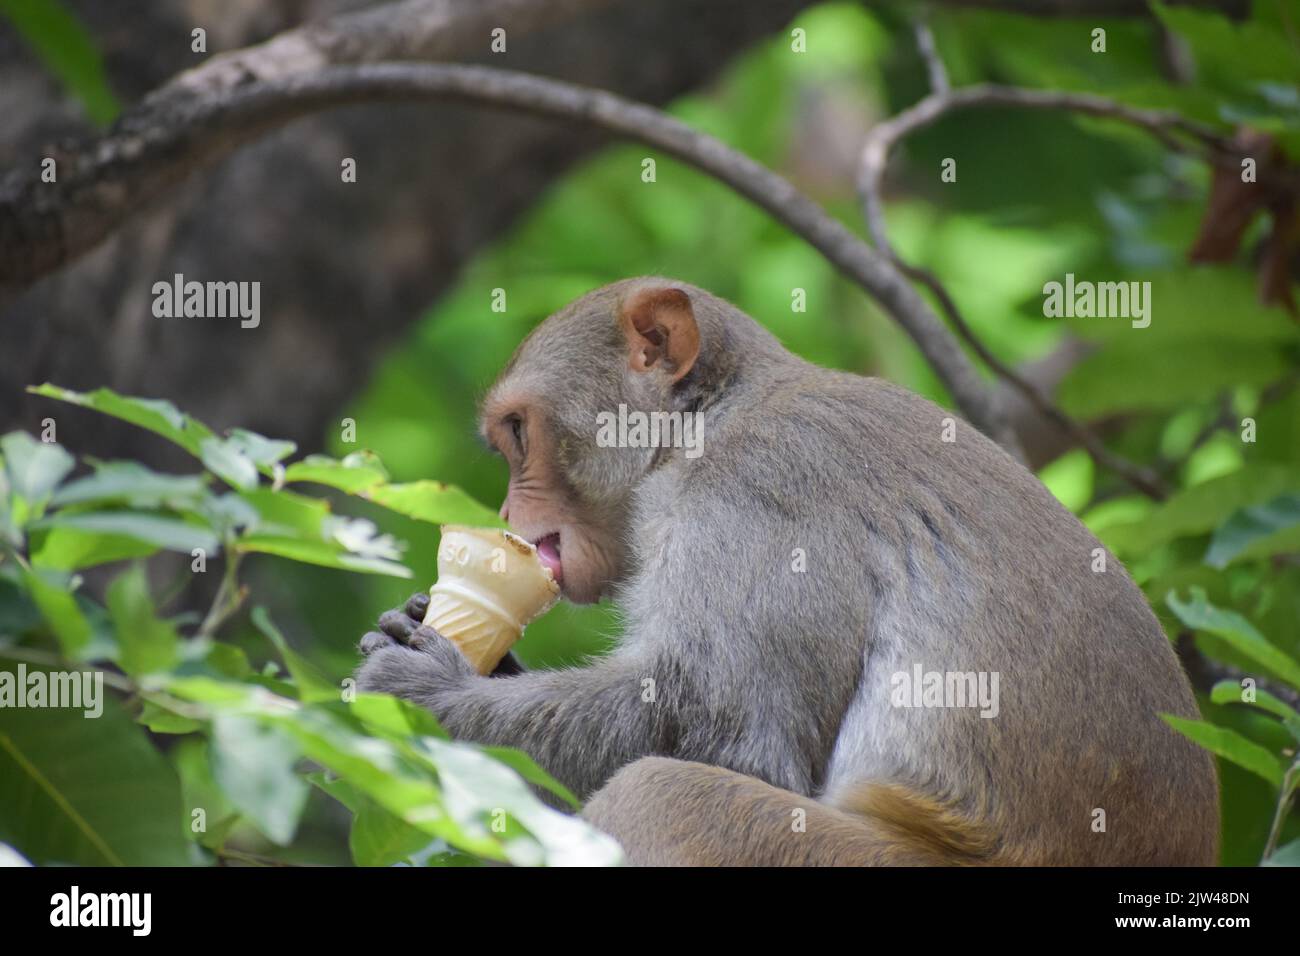 Indian Monkey is eating ice cream and sitting on a branch. Stock Photo